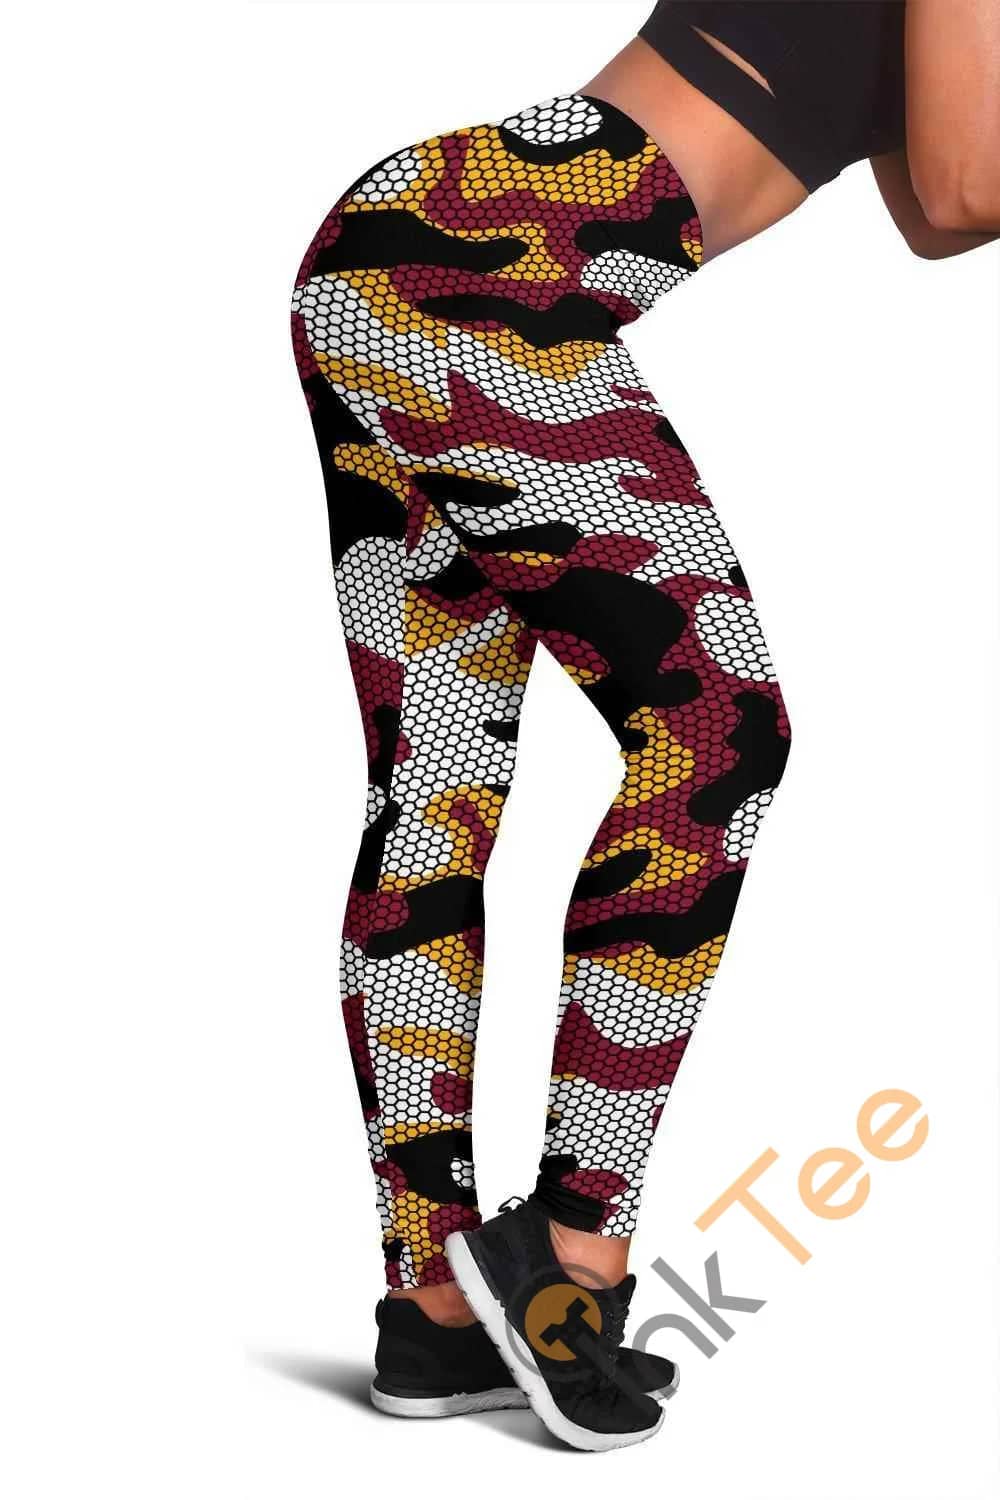 Arizona Cardinals Inspired Hex Camo 3D All Over Print For Yoga Fitness Fashion Women's Leggings